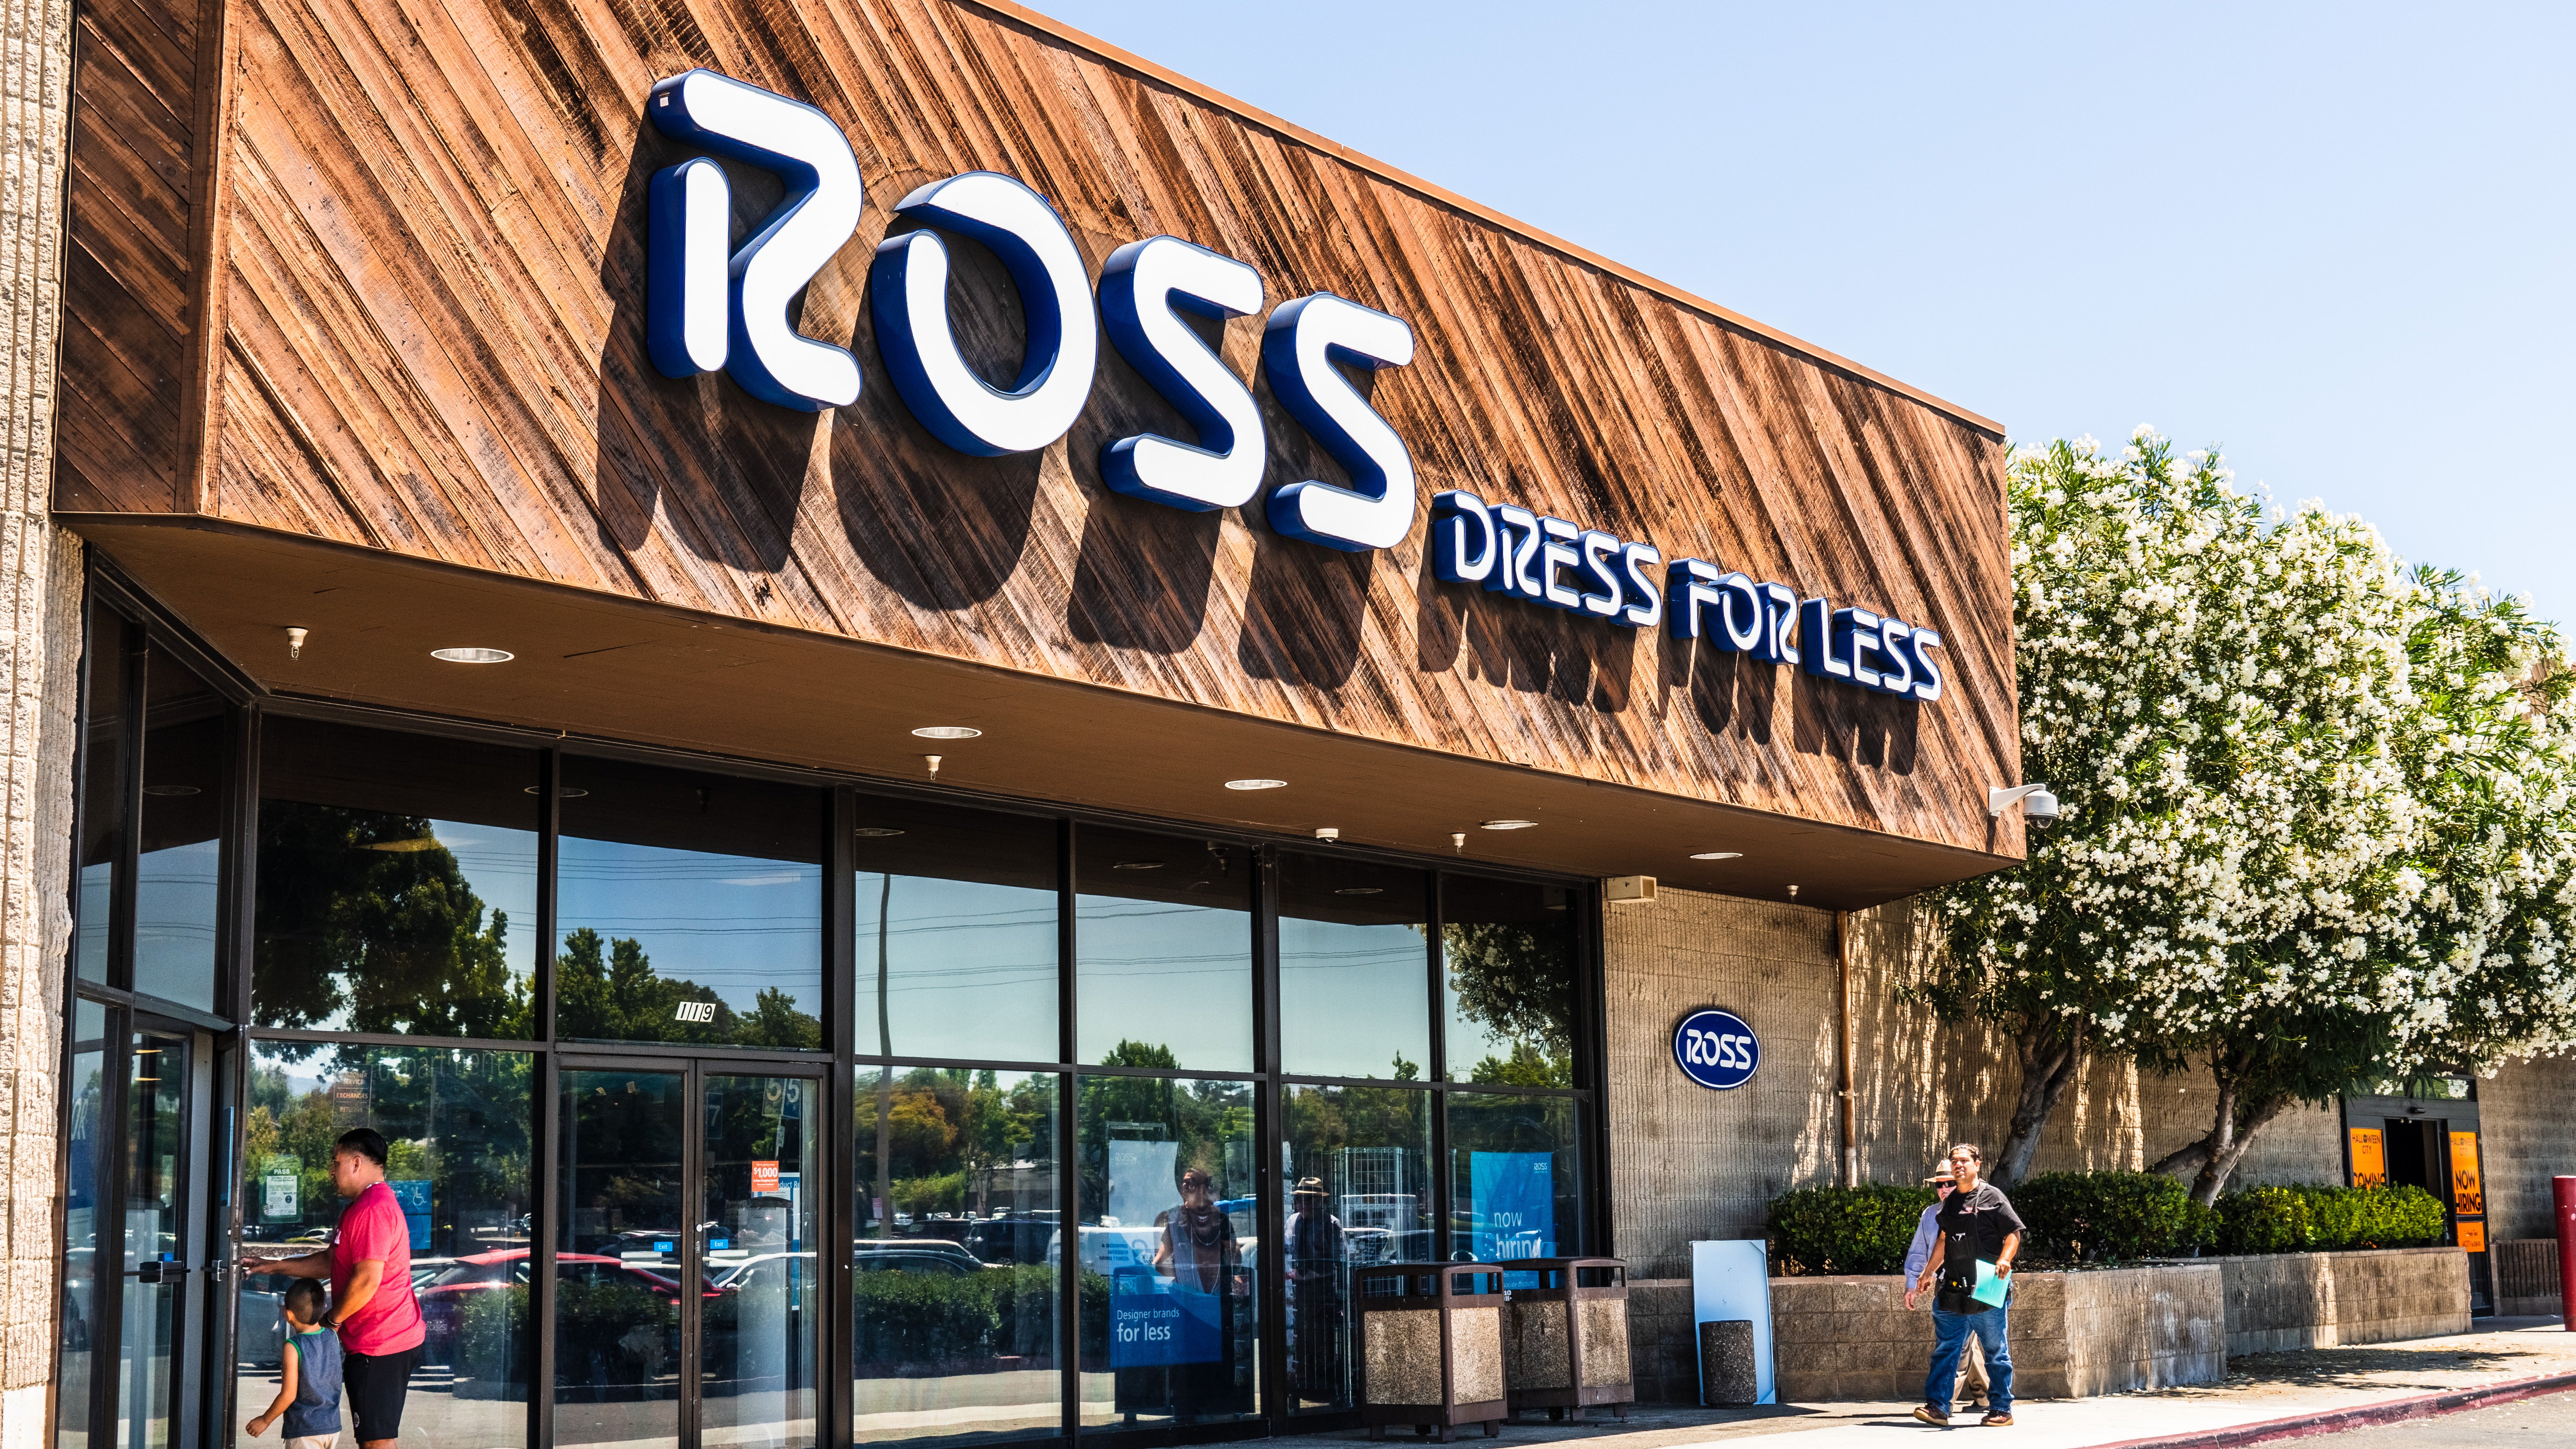 Ross Stores (ROST) Stock Plunges as Discount Retailer Cuts Profit